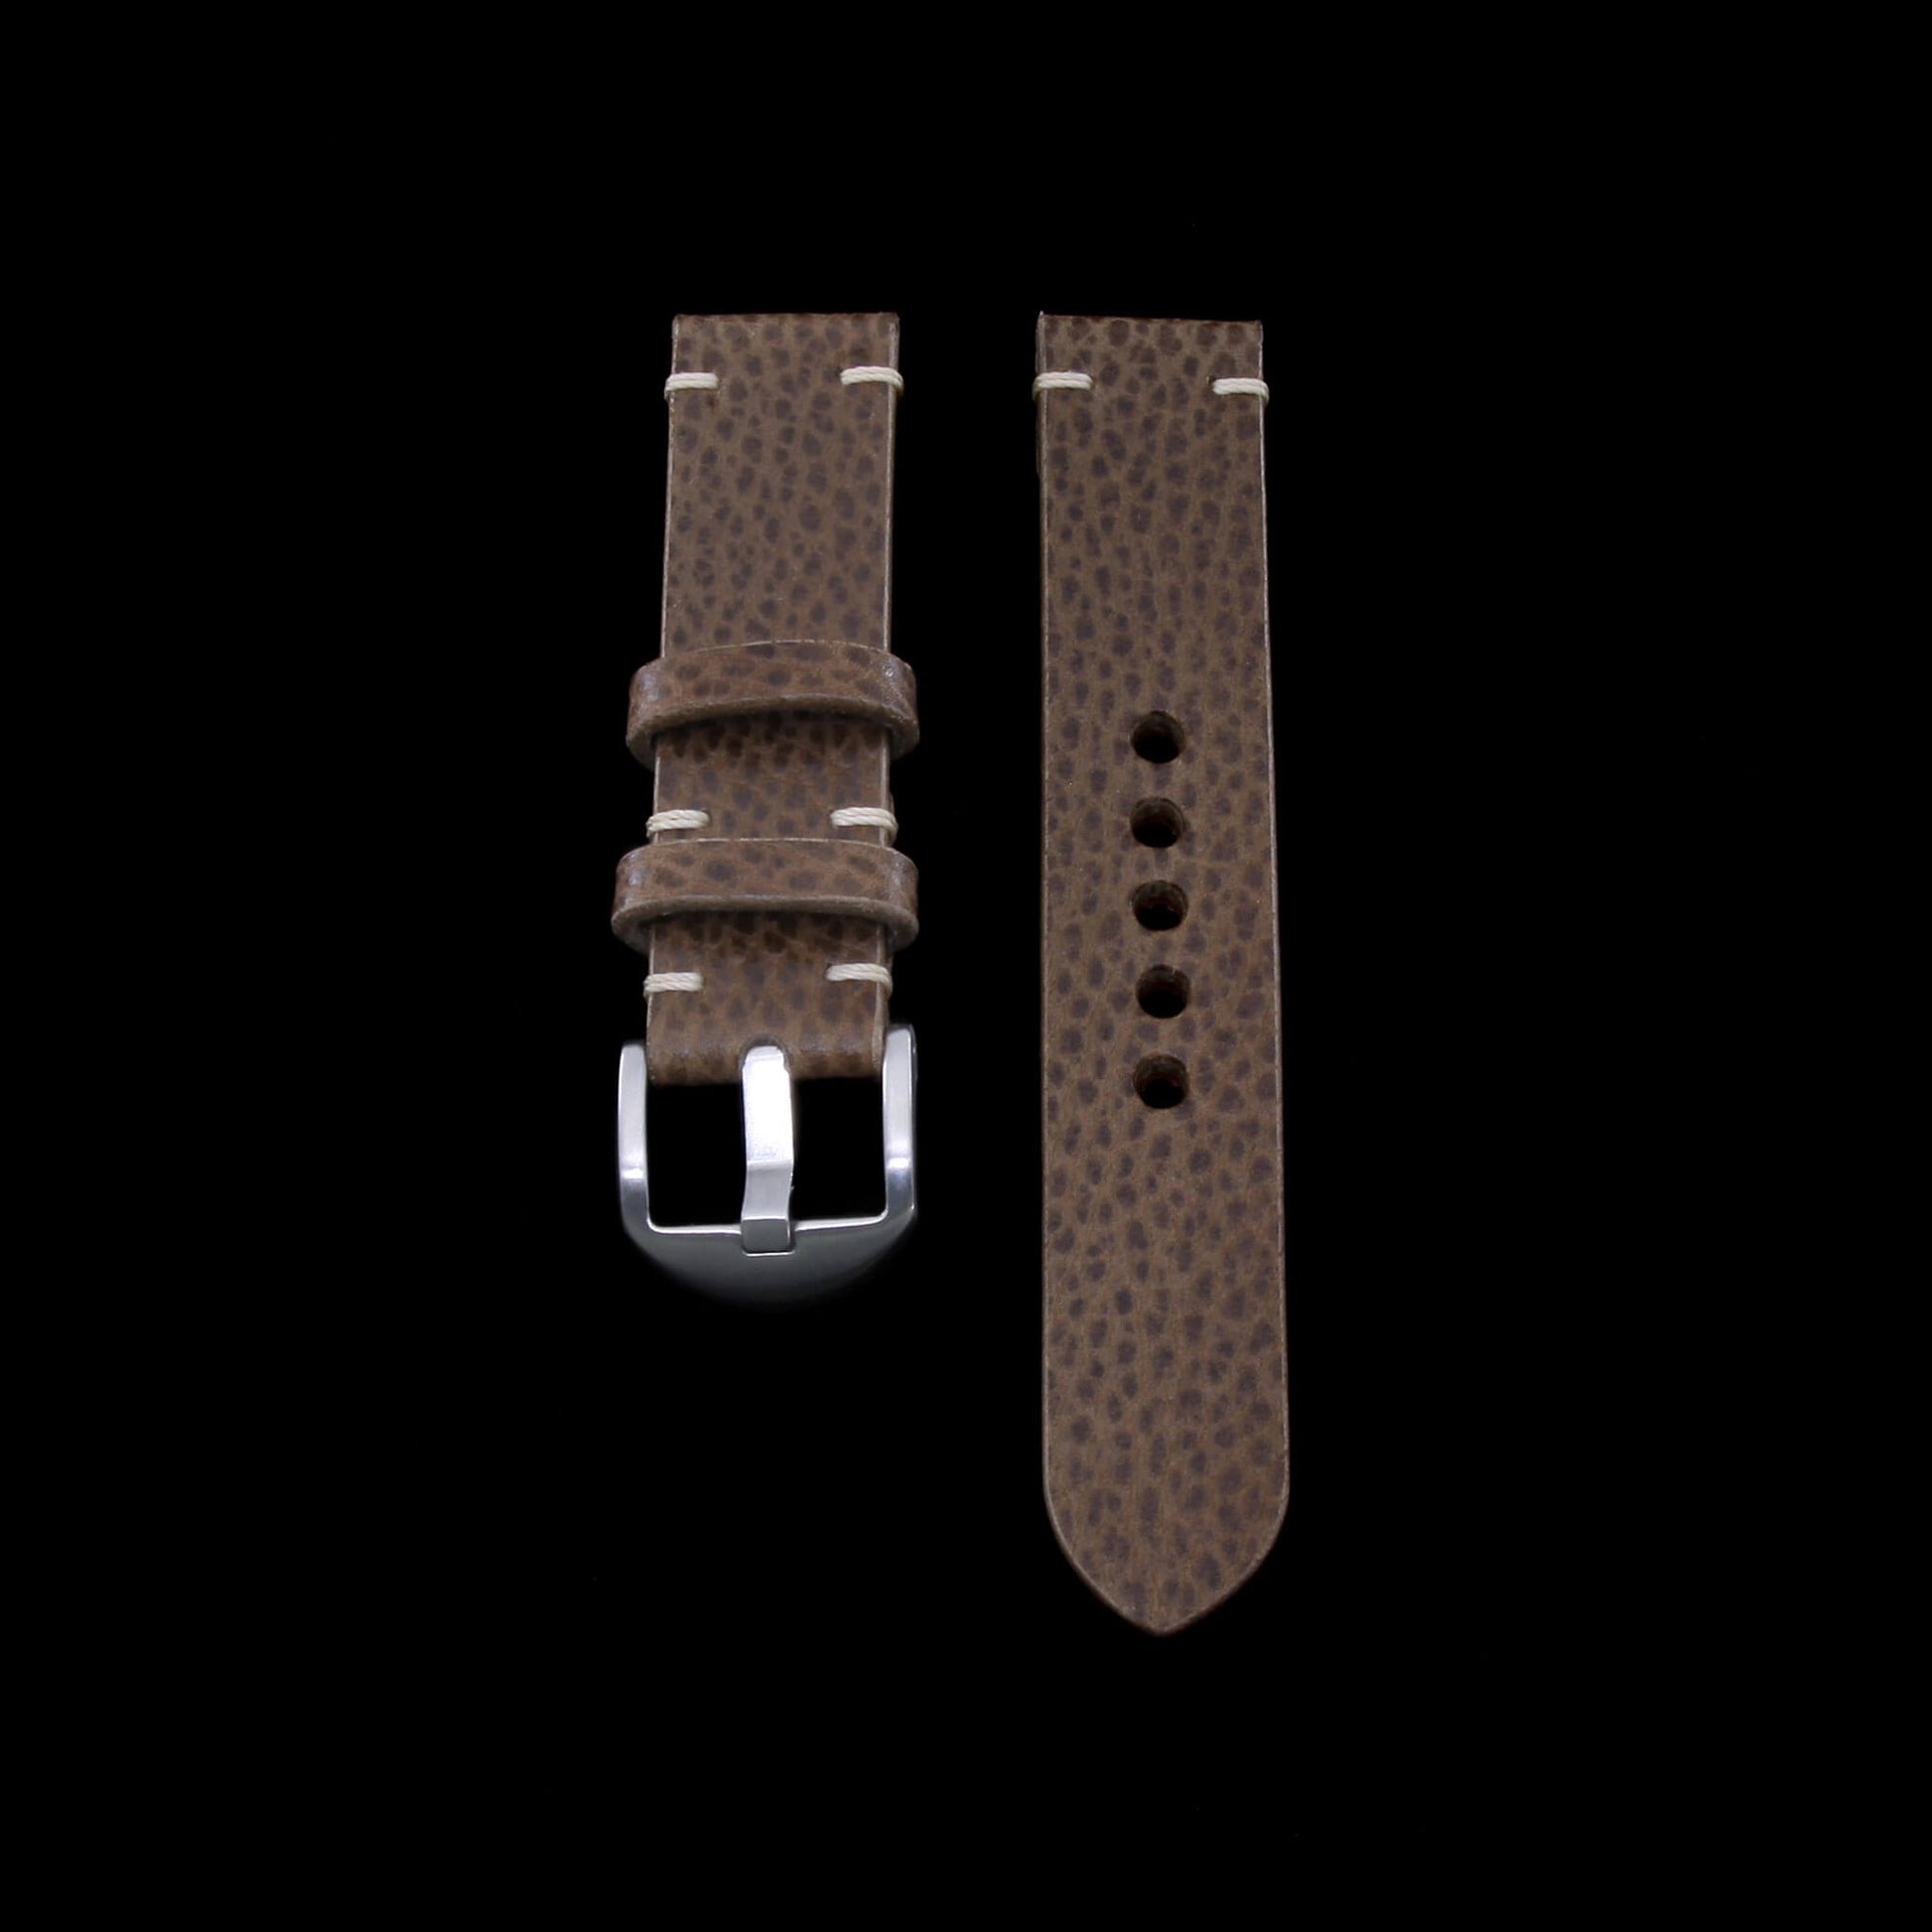 2nd View of 2-Piece Minimalist Leather Watch Strap, made with Buttero Taupe full grain Italian veg-tanned leather by Cozy Handmade